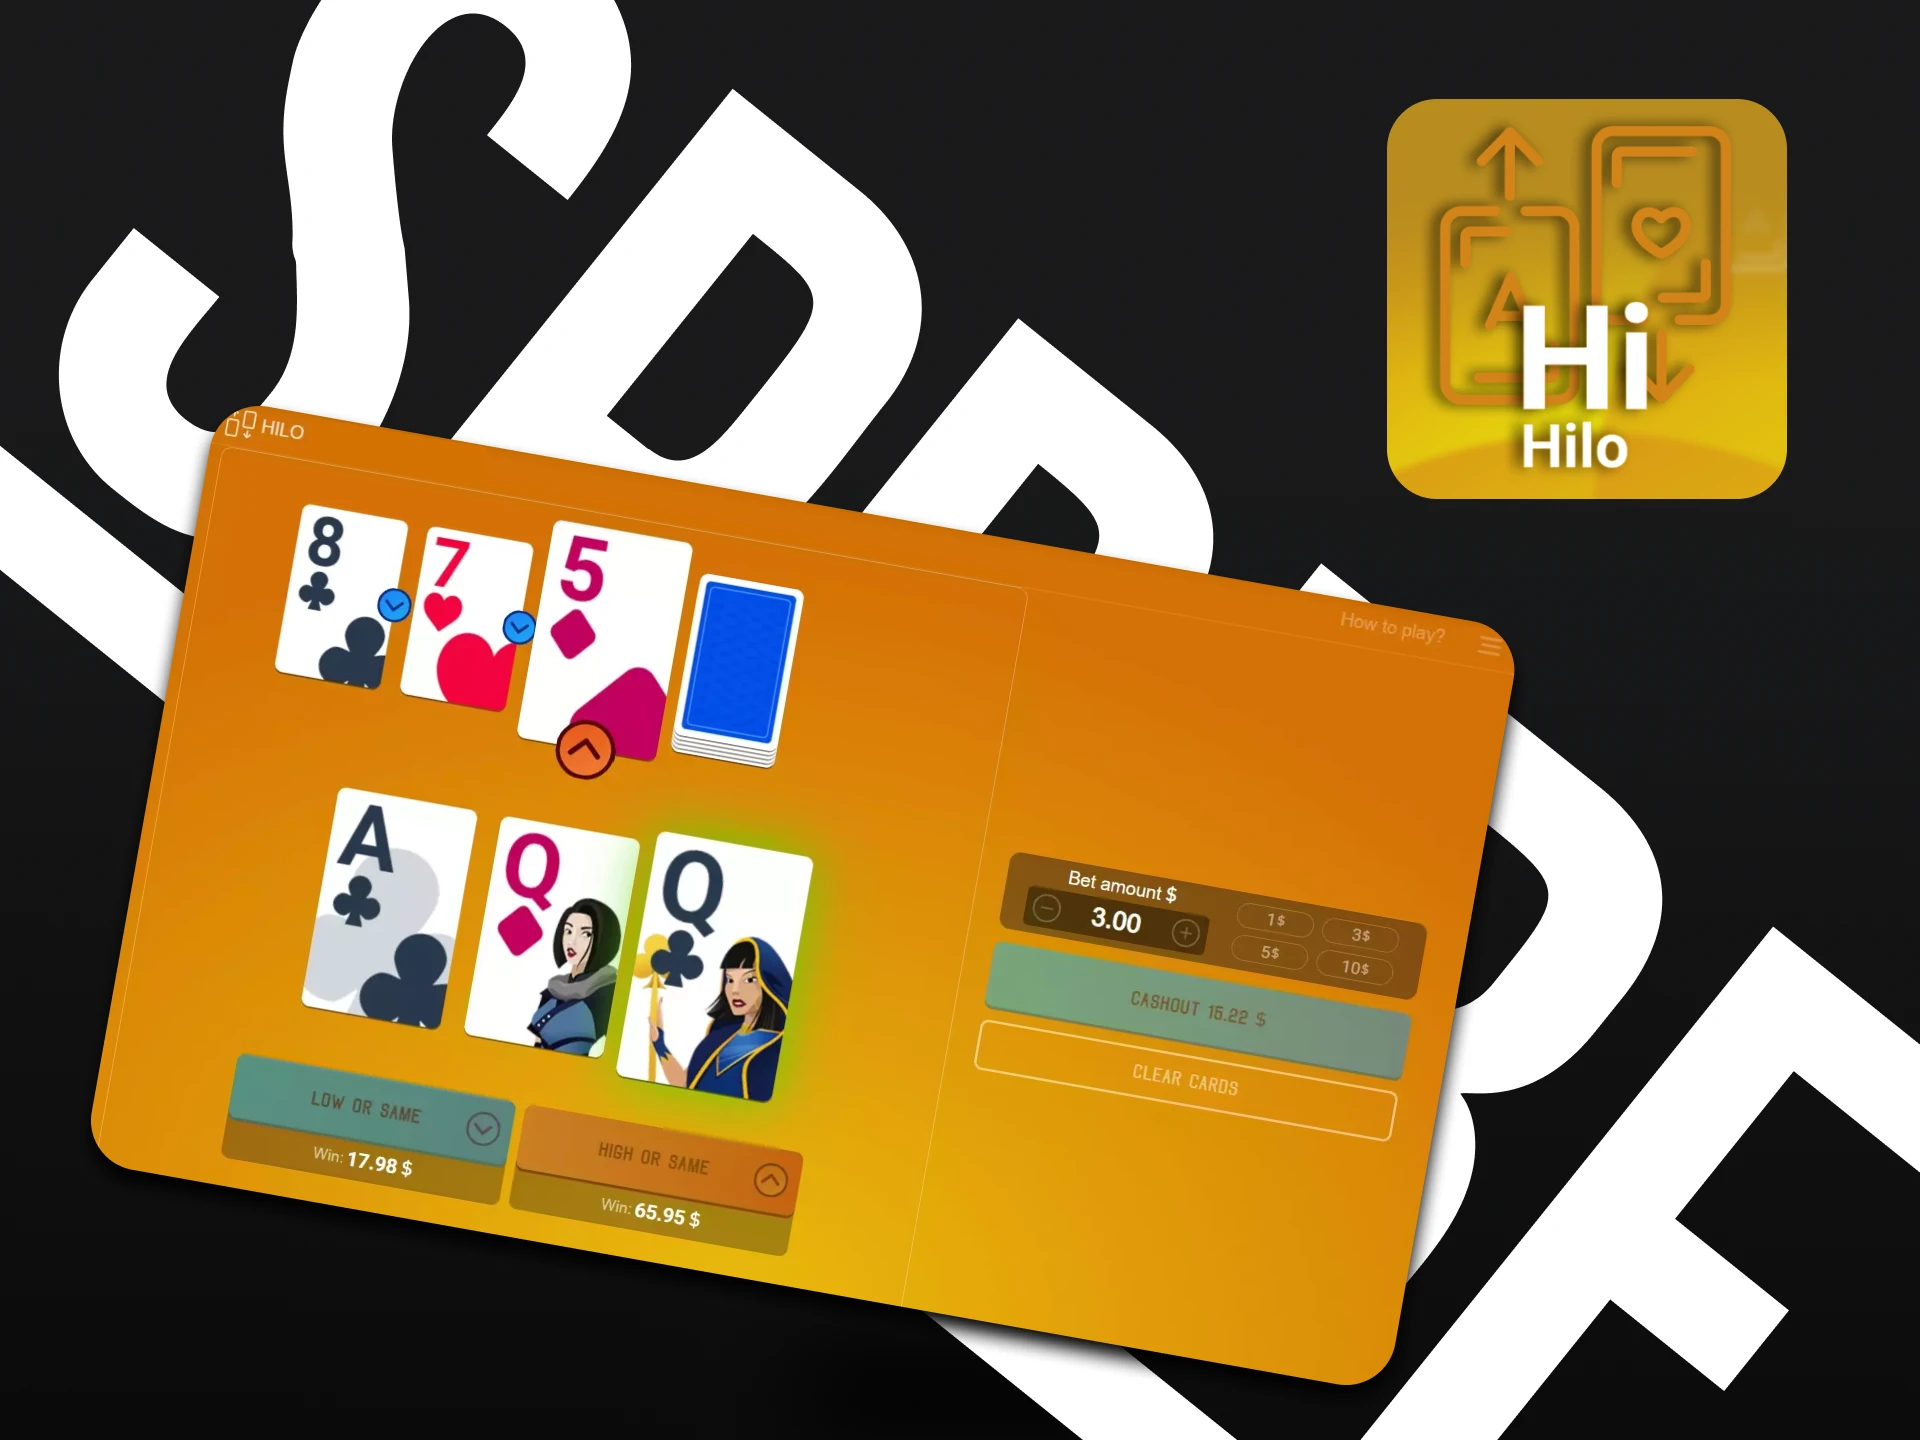 For a game from the Spribe provider, choose Hilo.